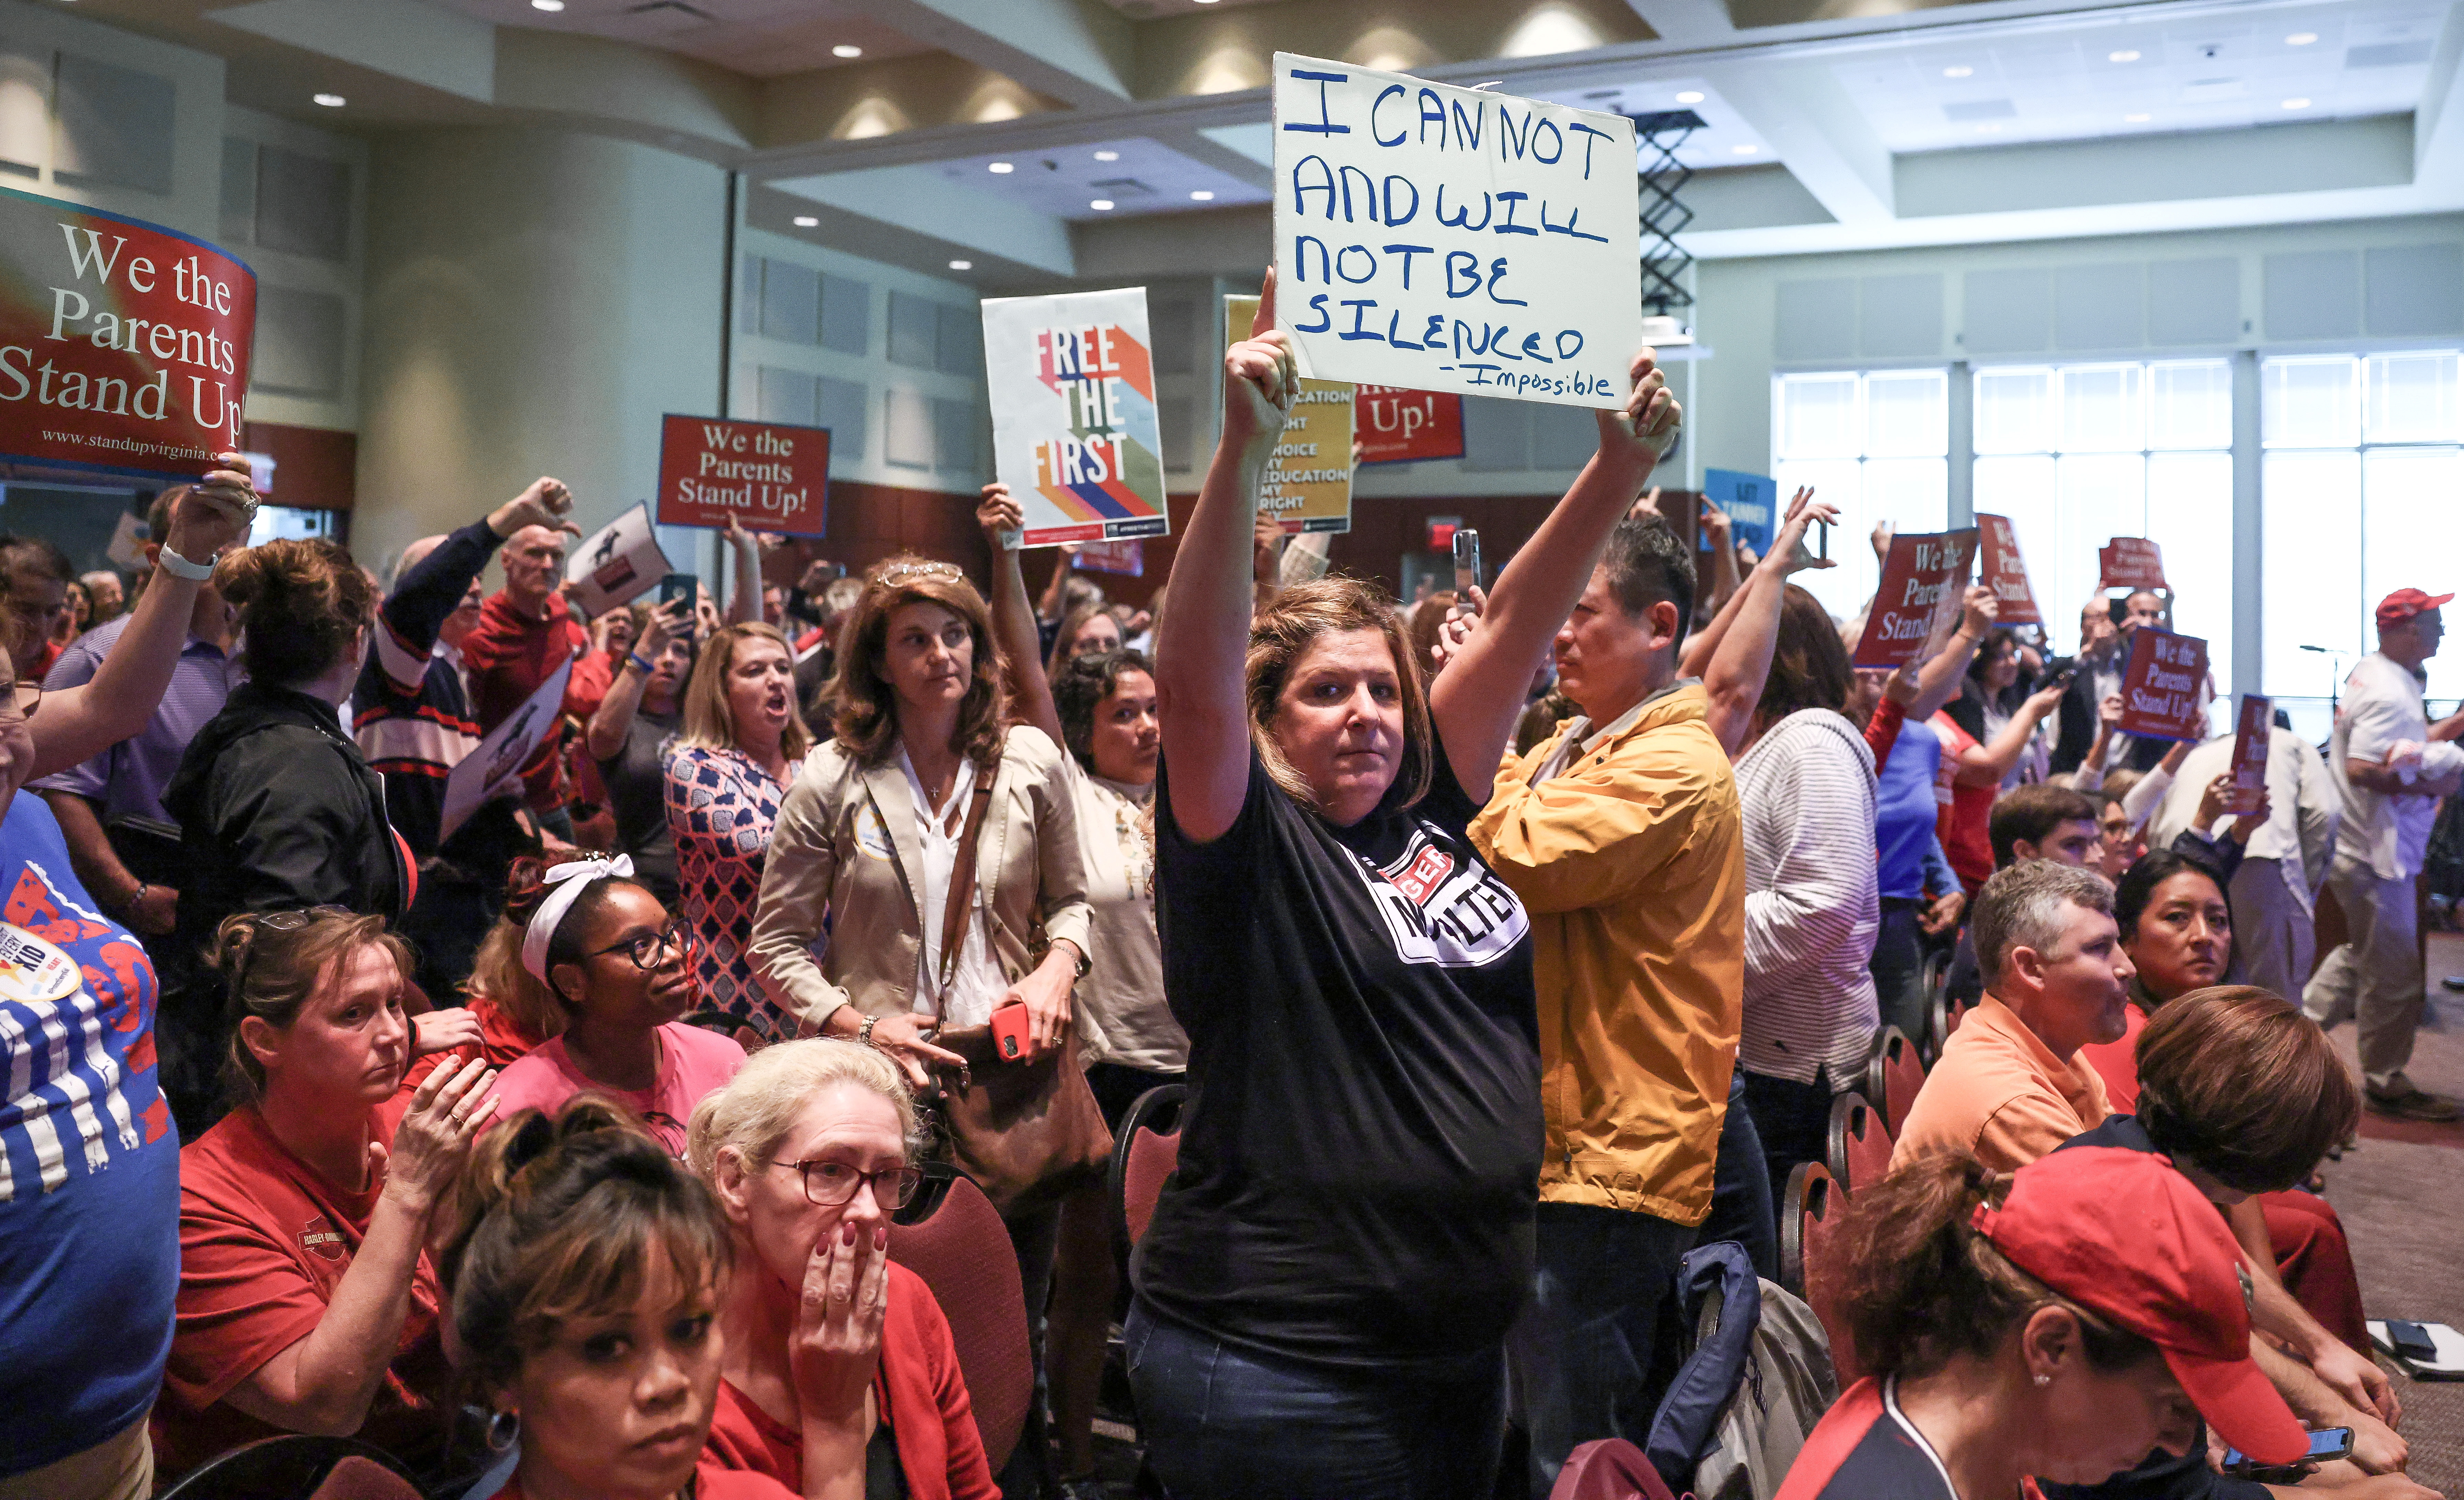 A Virginia School board meeting reflects a battle playing out across the country over a once-obscure academic doctrine known as Critical Race Theory, in Ashburn